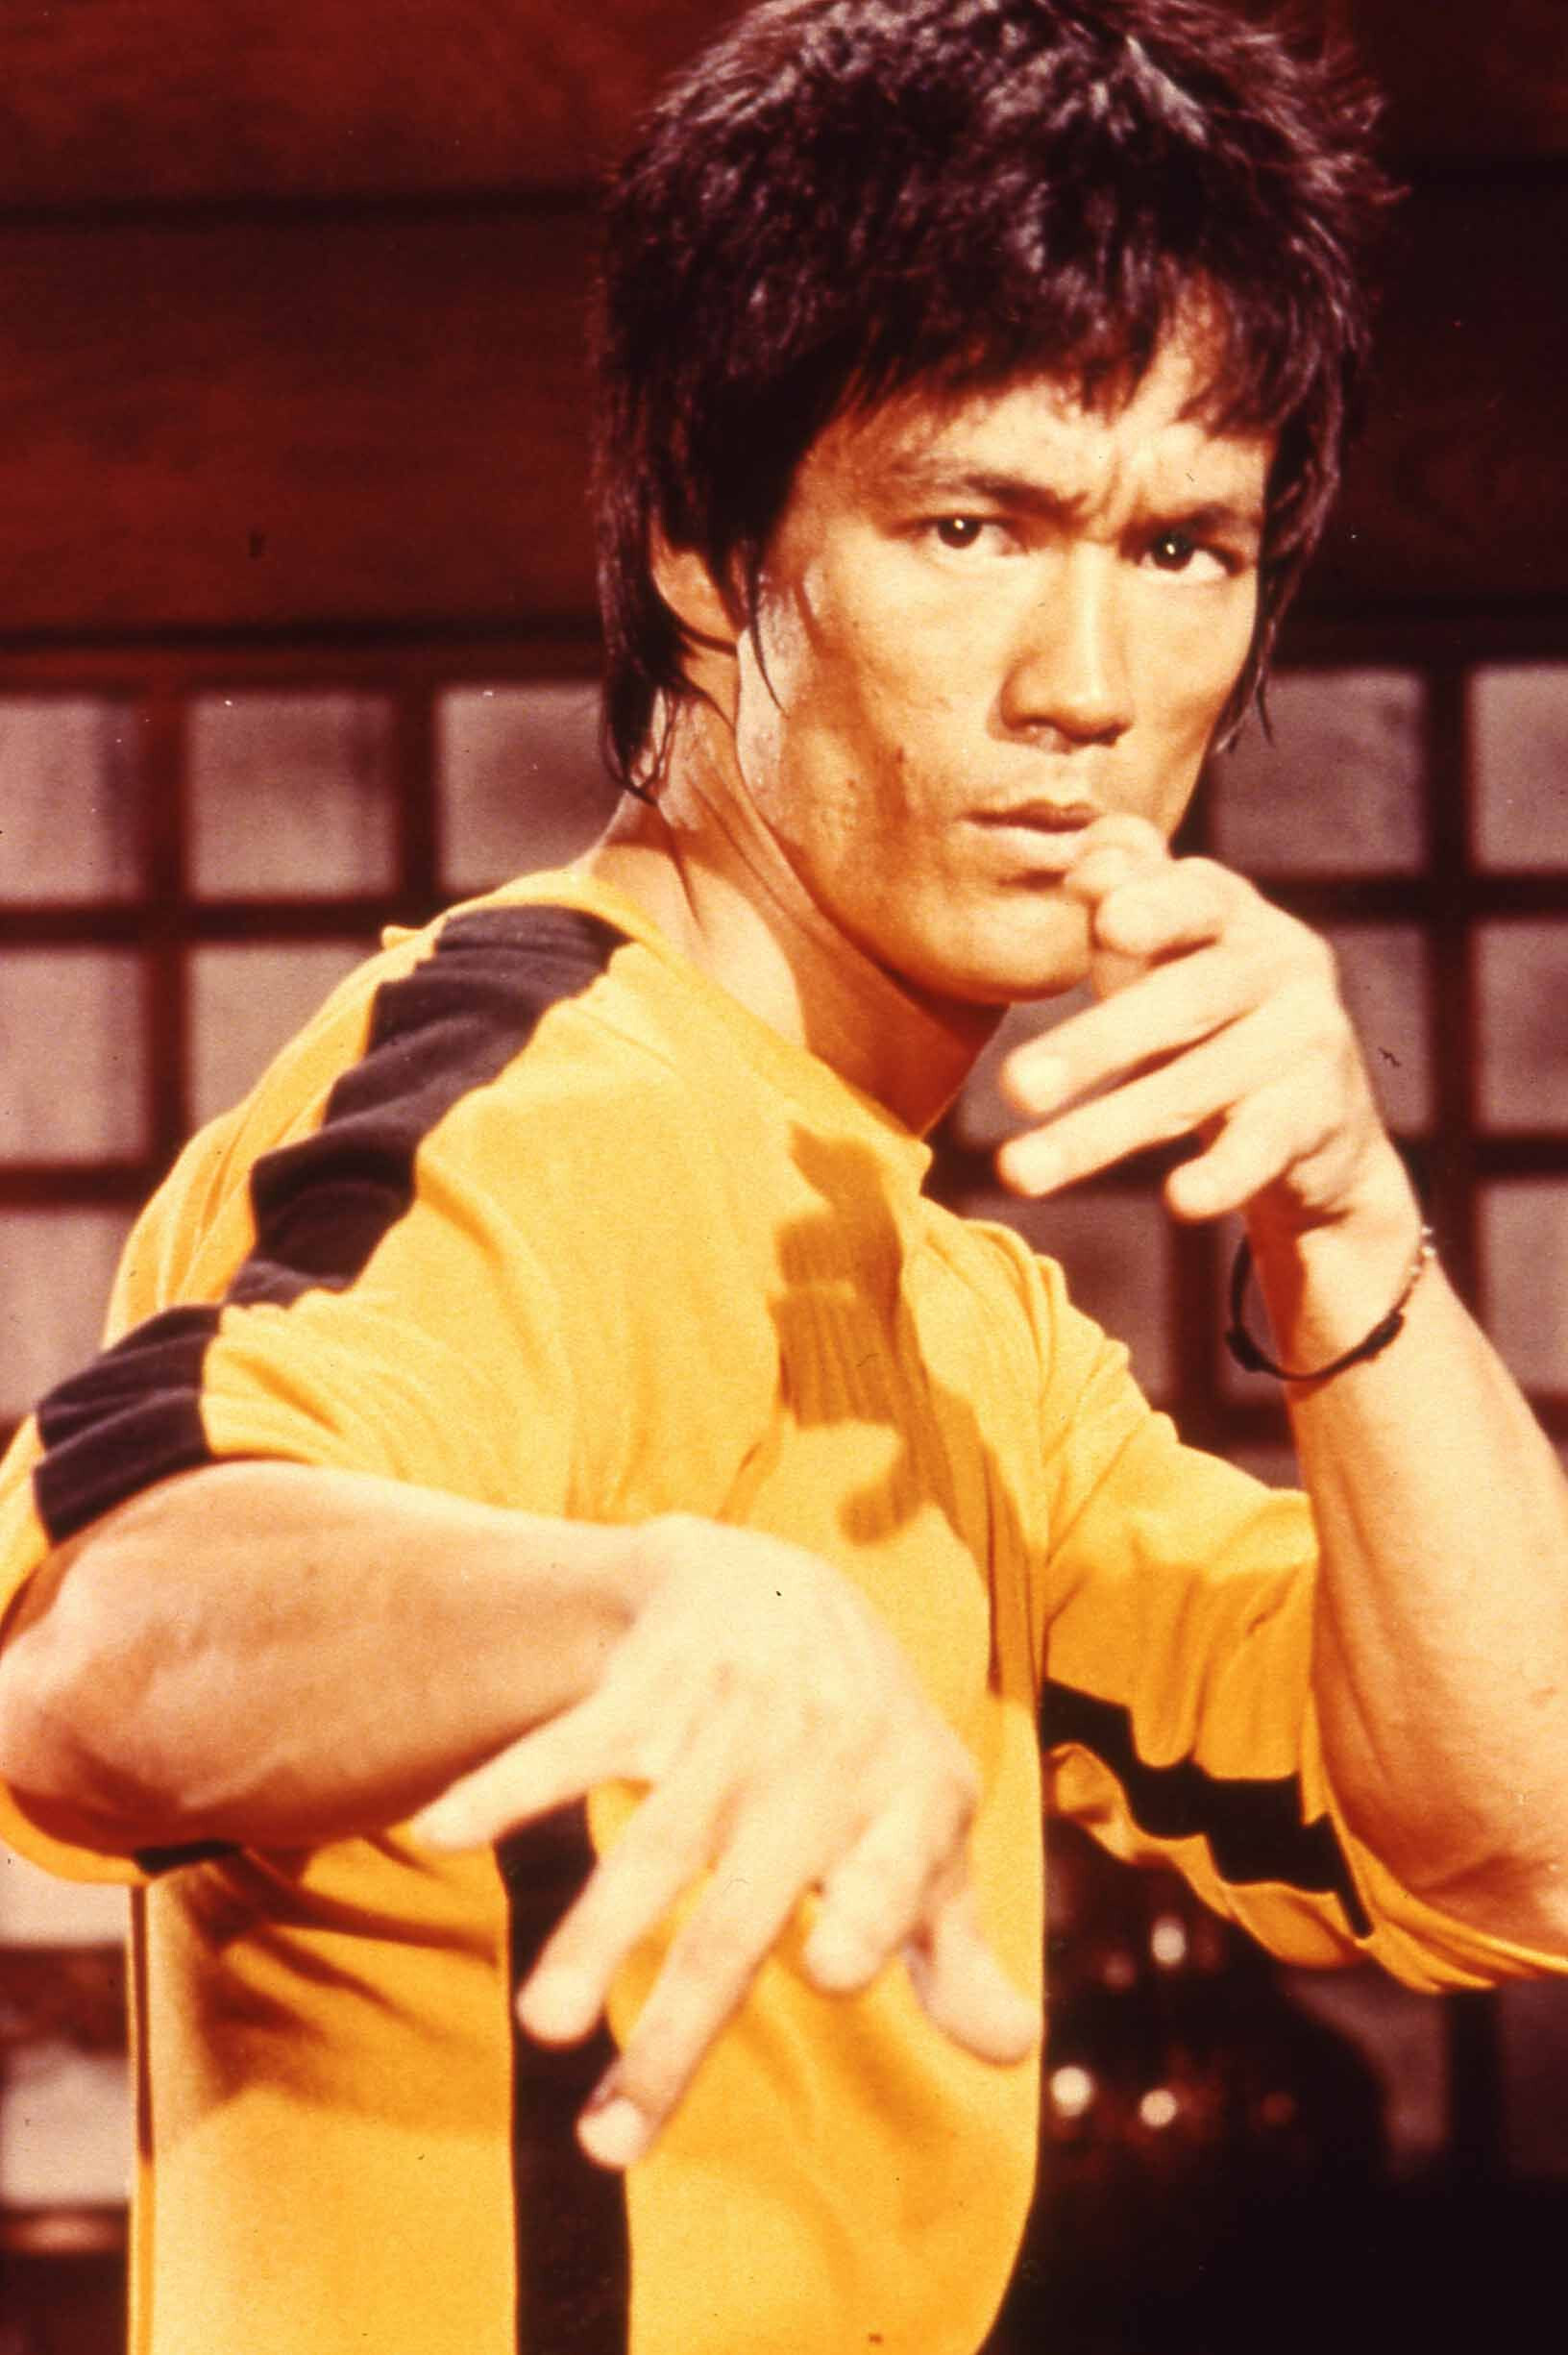 Bruce Lee in a still from Game of Death. His fans in 1970s Britain kept in touch through The KFM Bruce Lee Society, which is the subject of a book by Carl Fox.